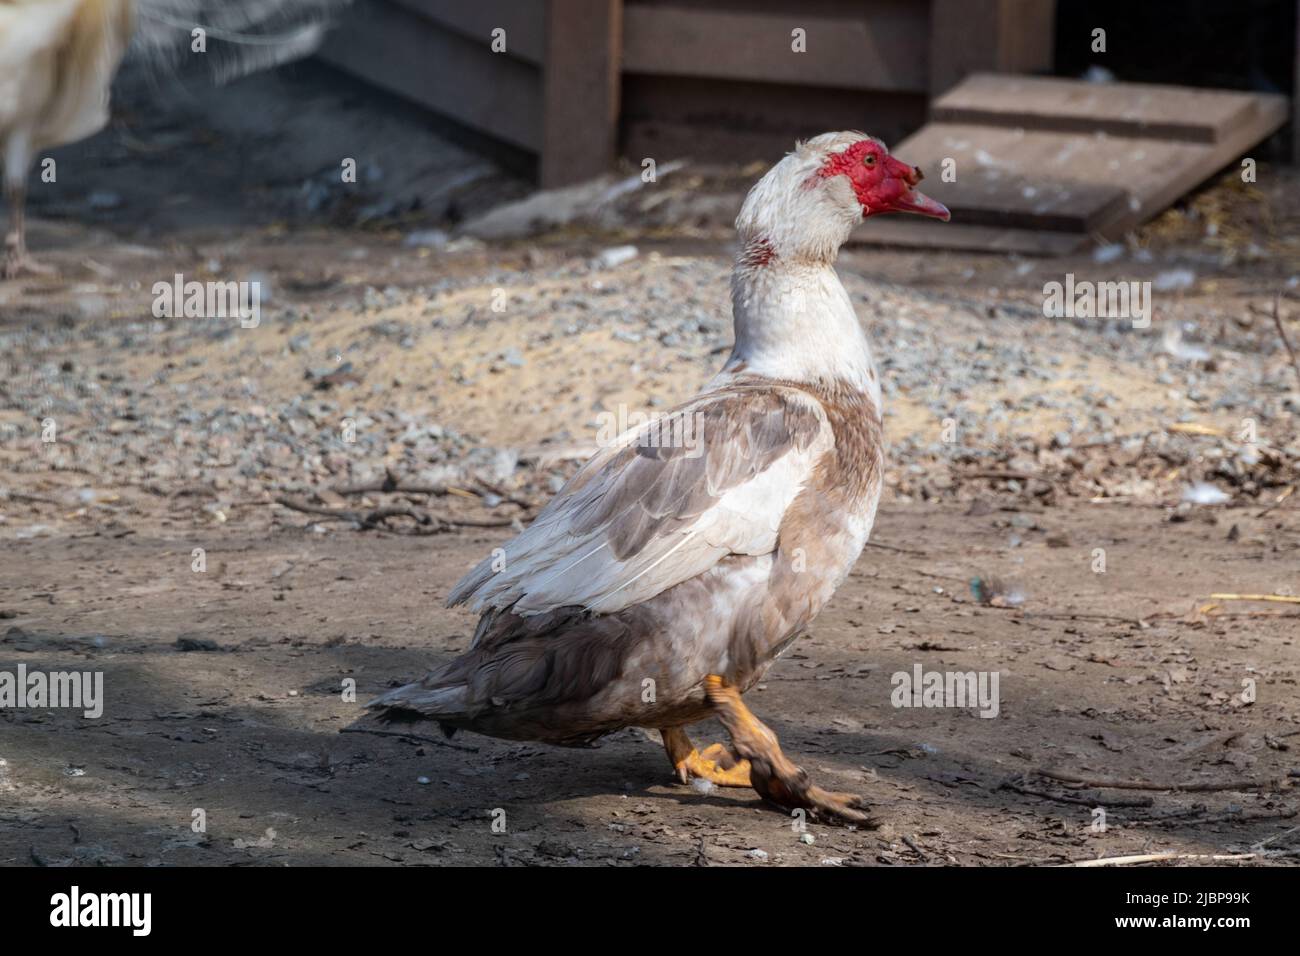 White and brown Muscovy Duck (Cairina moschata) with red face walking in aviary close-up Stock Photo